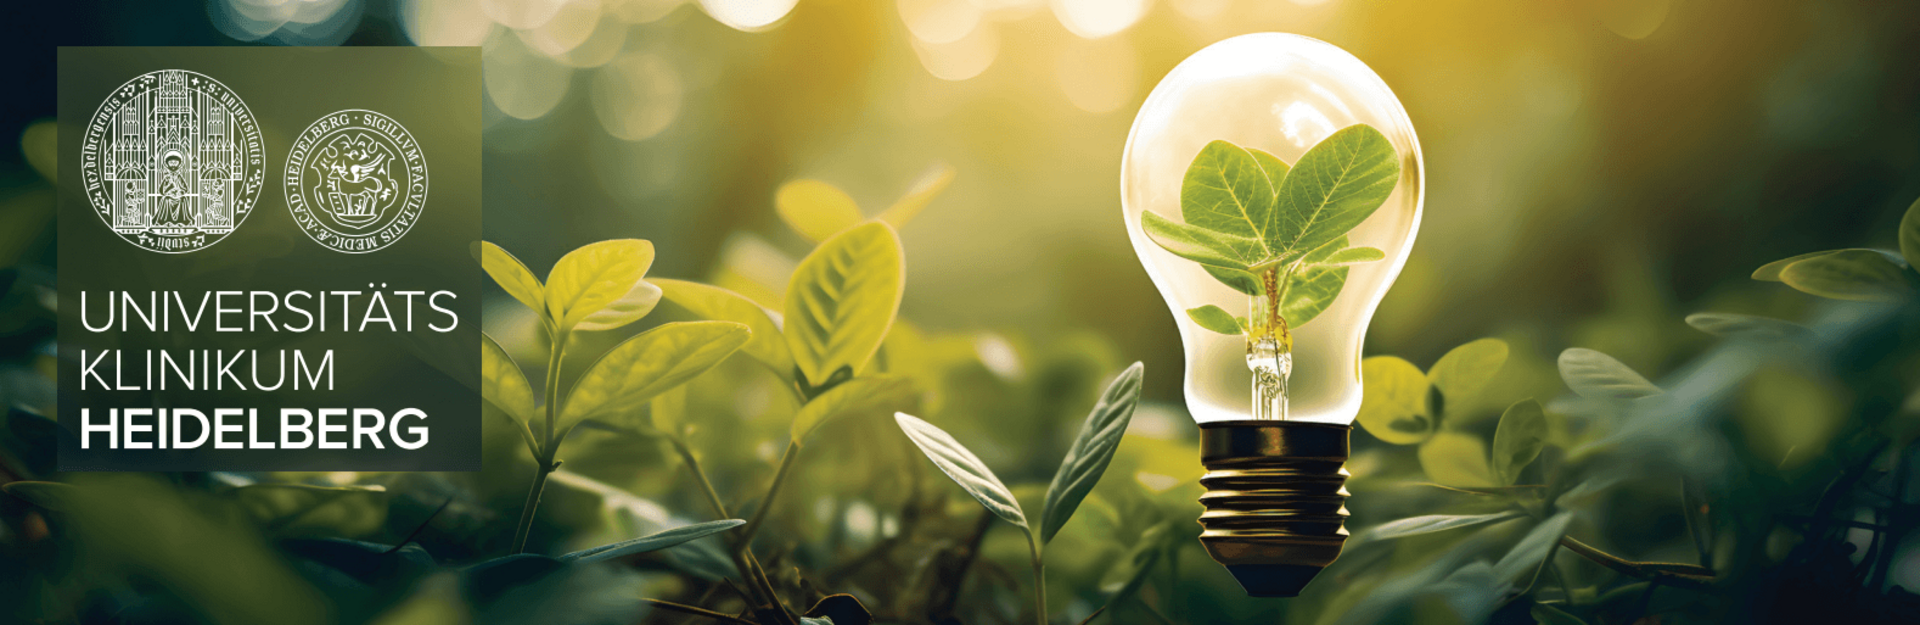 [Translate to English:] UKHD logo to the left of the light bulb in the centre right of the picture. In the light bulb a small branch with four green leaves. In the background warm light shining on green leaves. The background is blurred. 